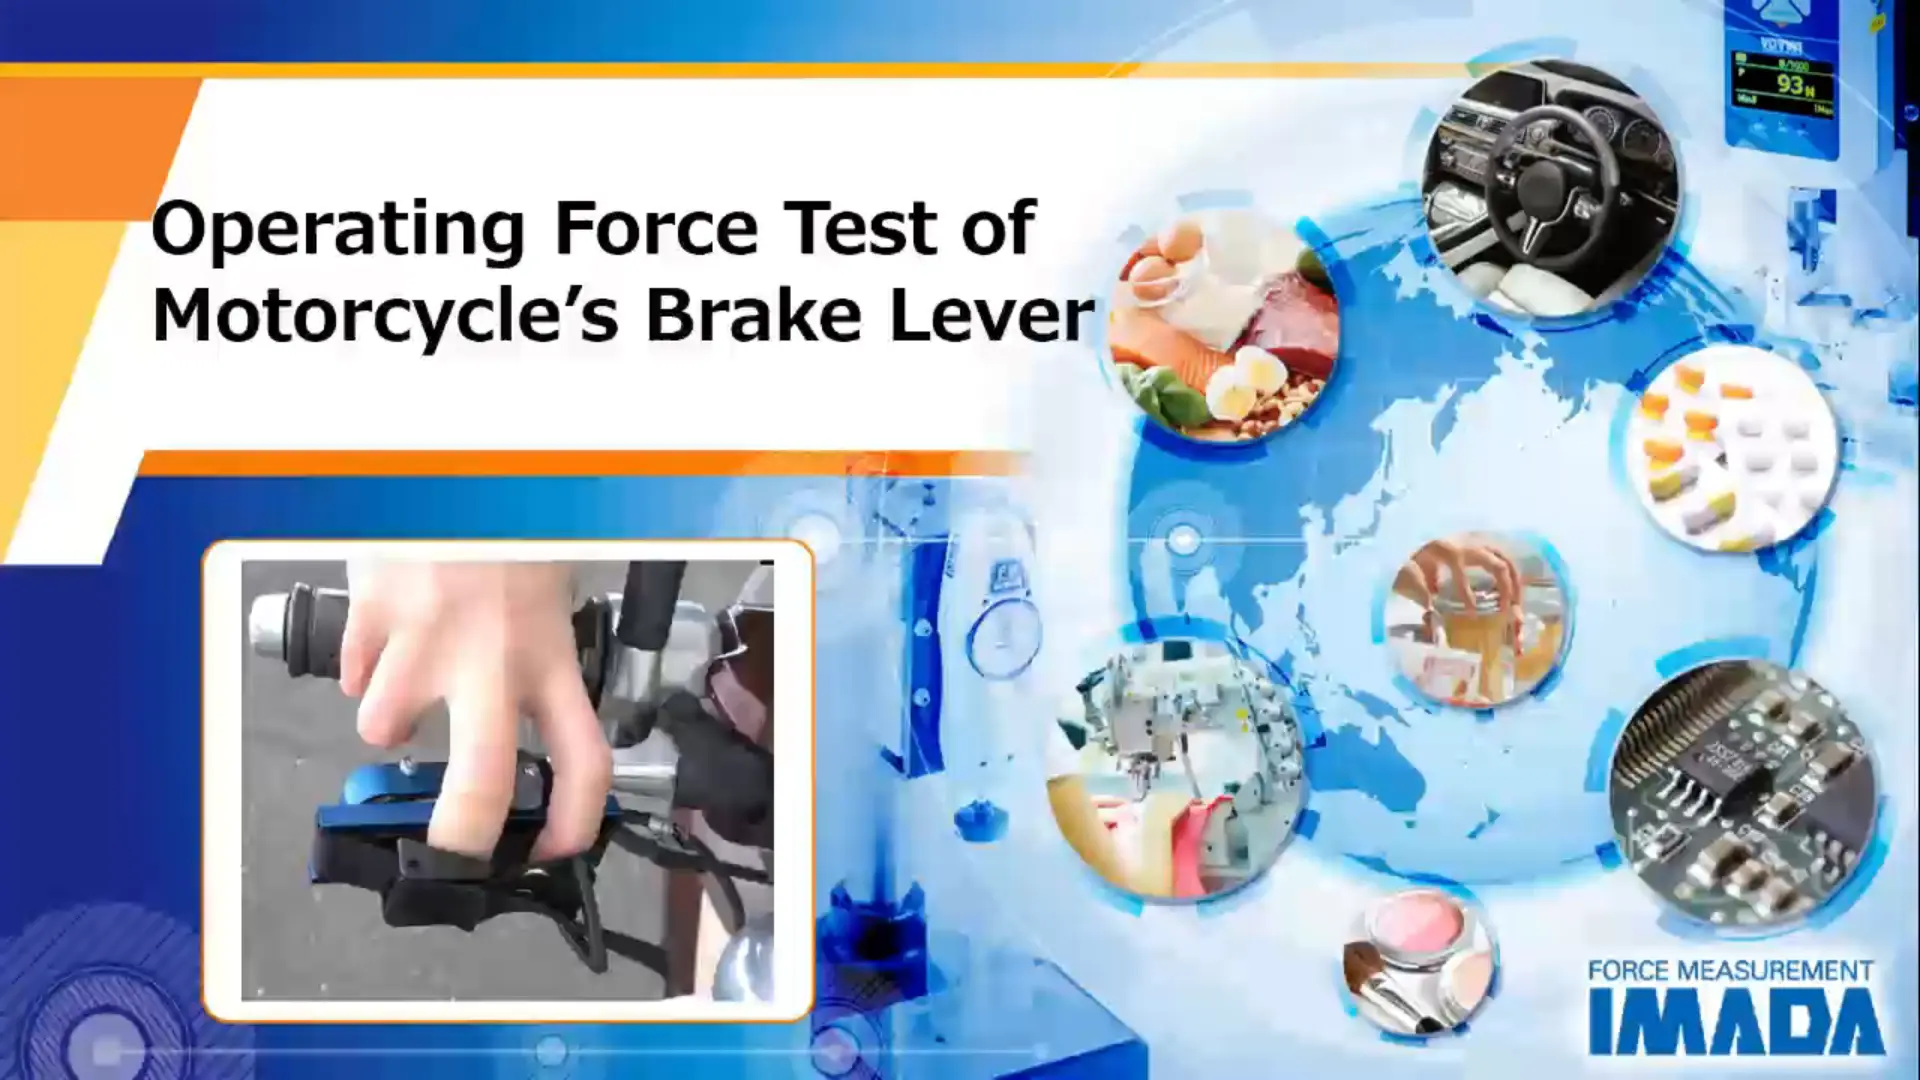 Operating Force Test of Motorcycle’s Brake Lever